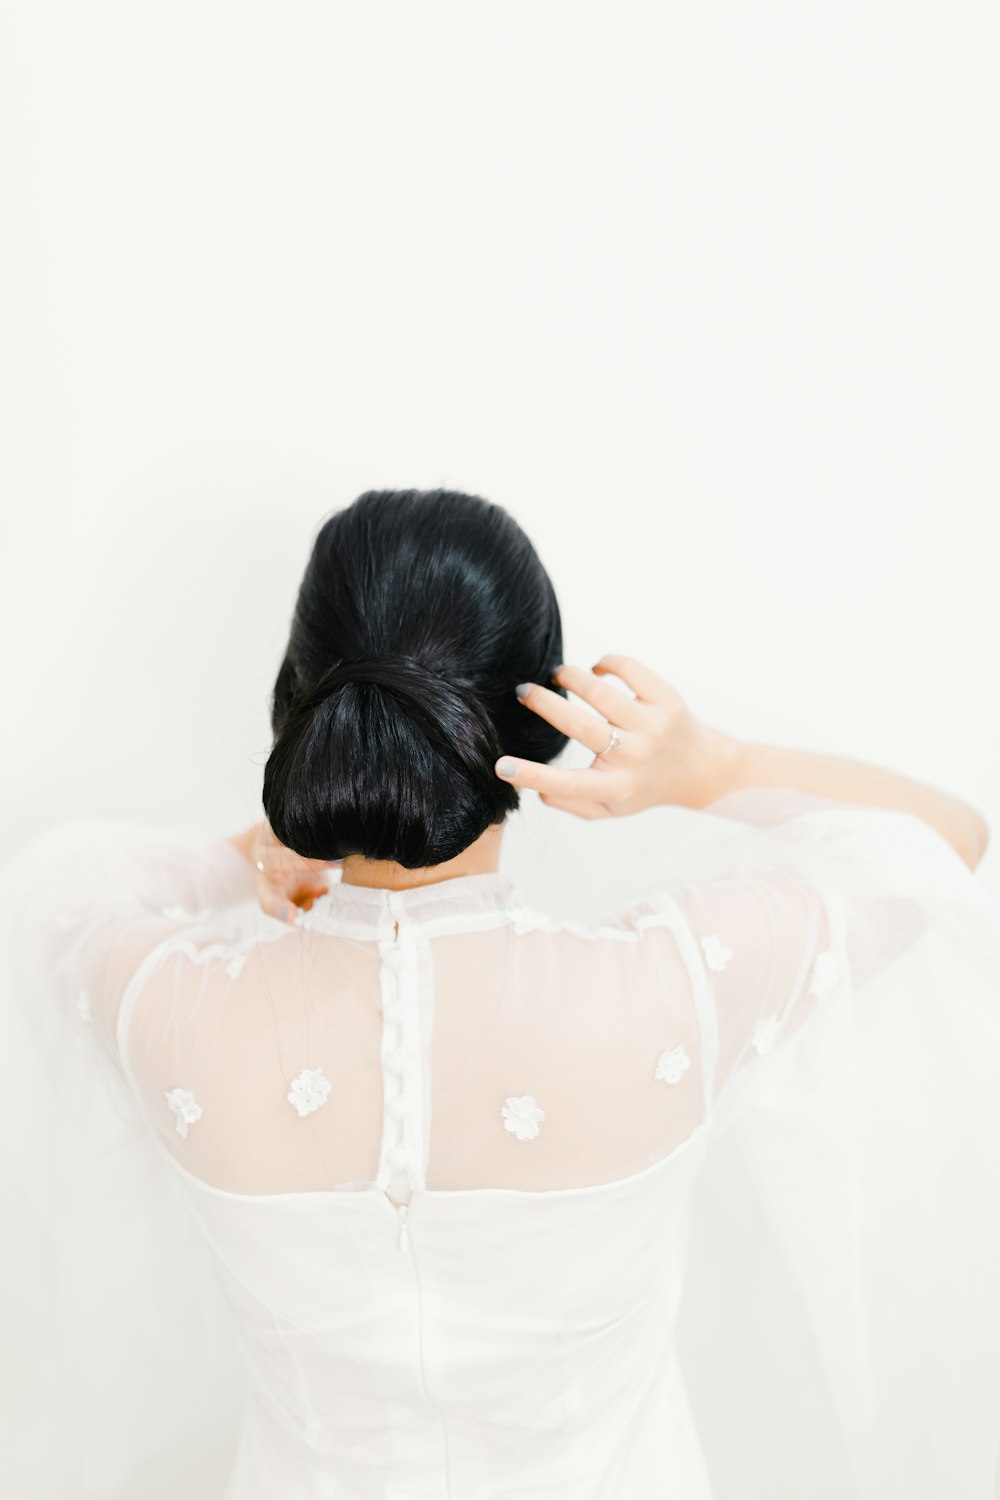 woman in white dress covering her face